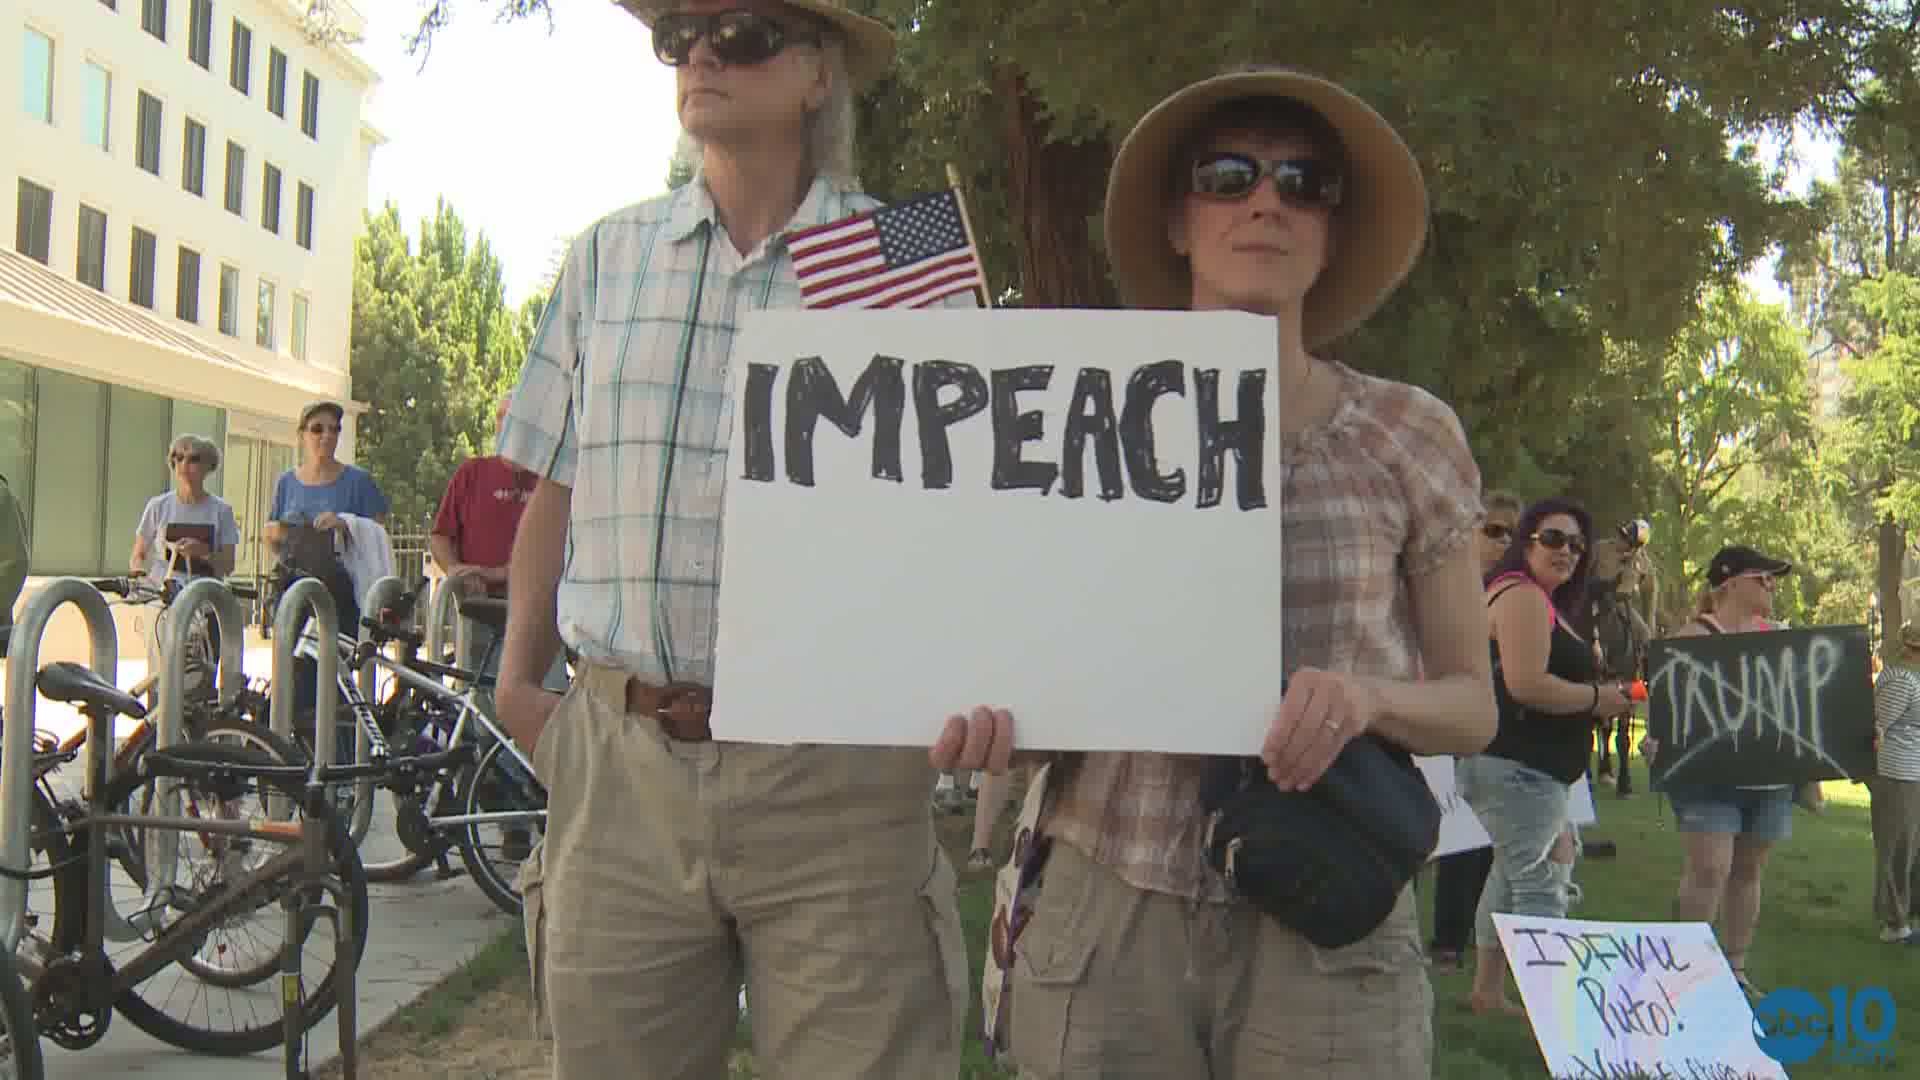 Impeachment demonstrators, hoisting signs and chanting anti-Donald Trump slogans, marched through dozens of cities on Sunday (July 2, 2017)